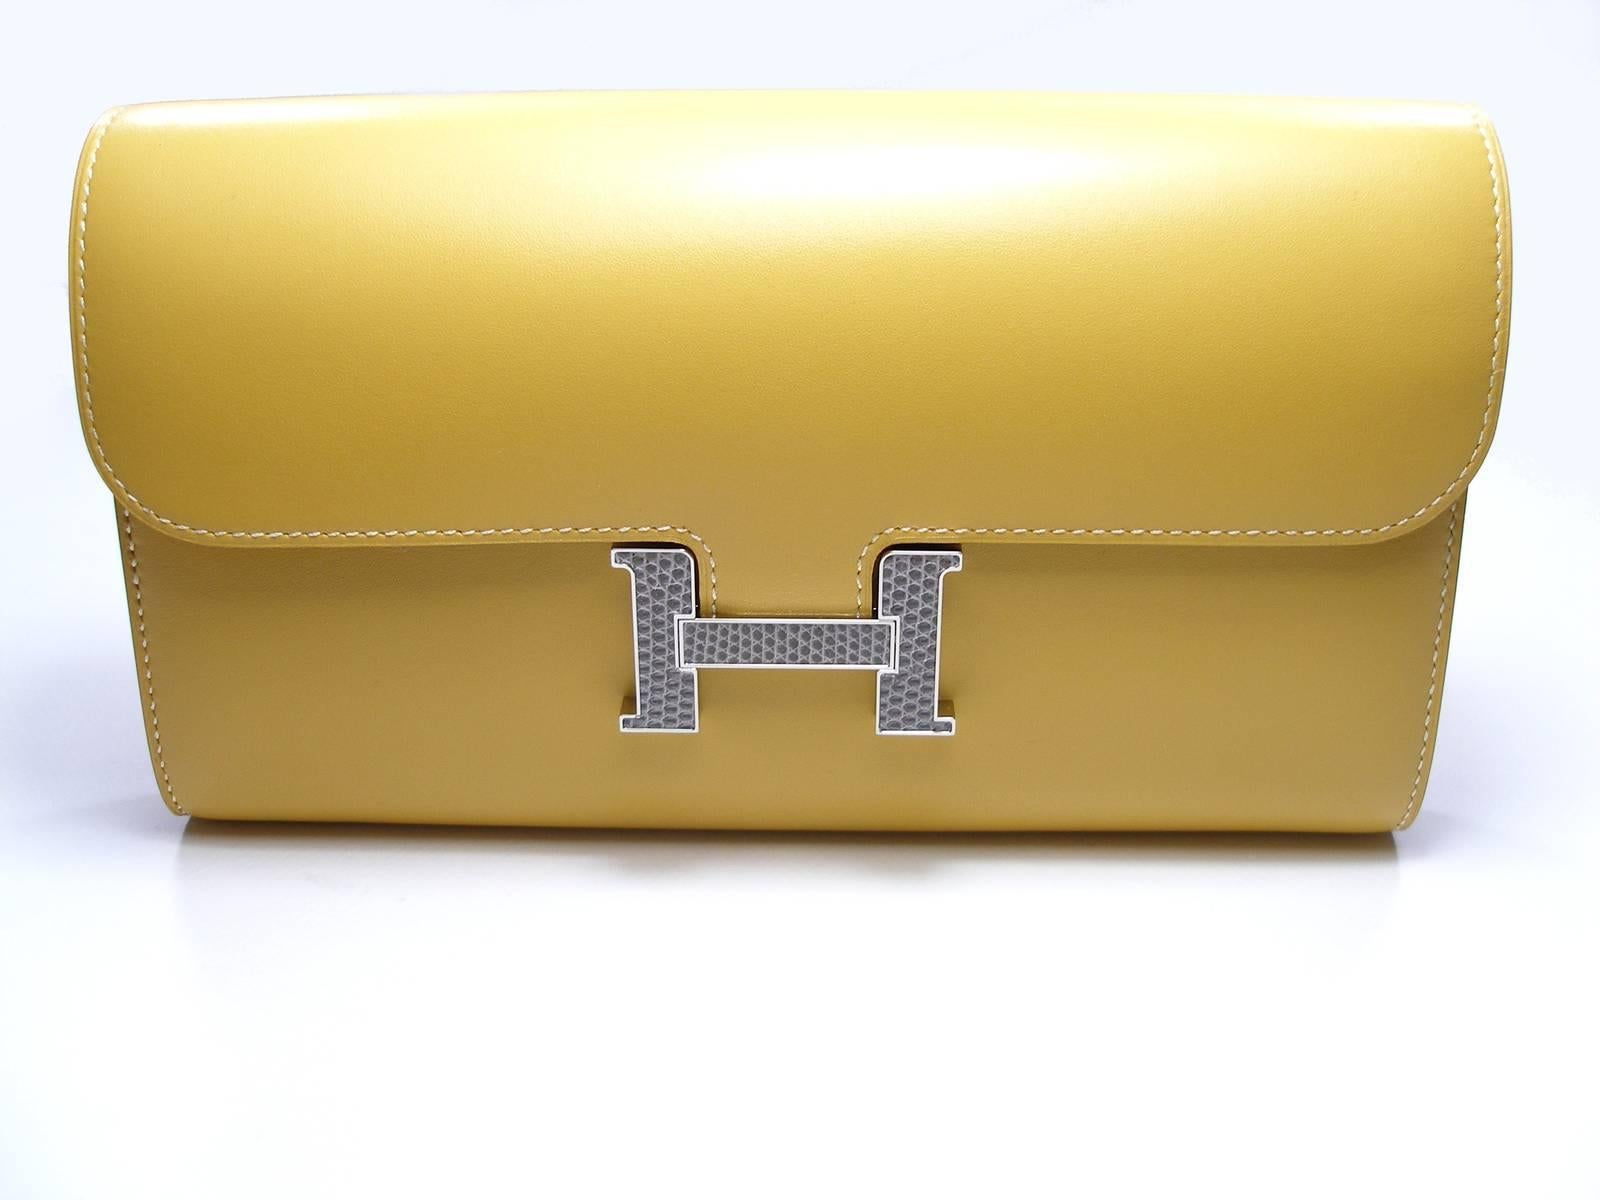  Stunning Hermès Long Wallet Constance        
 and the iconic H clips in lézard
 Leather : veau tadelakt
 Color Paille 
 H in lézard color Agate and palladium
 Condition : Brand New / Never used  
 Dimensions : 20.5 x 11.5 x 3 cm
 Please note for